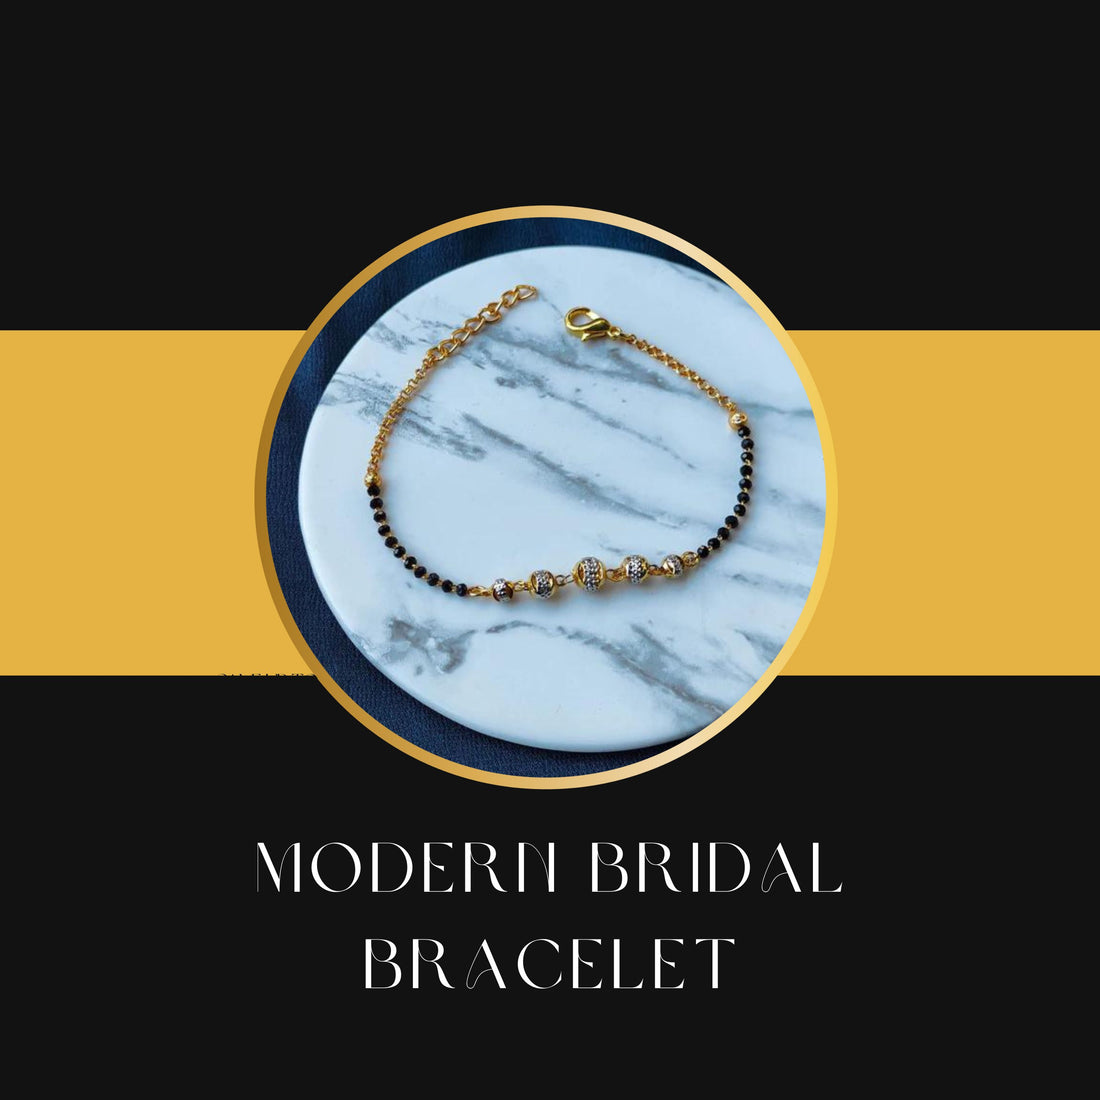 Say "No" to Traditional! The Modern Bridal Bracelet You Must Have